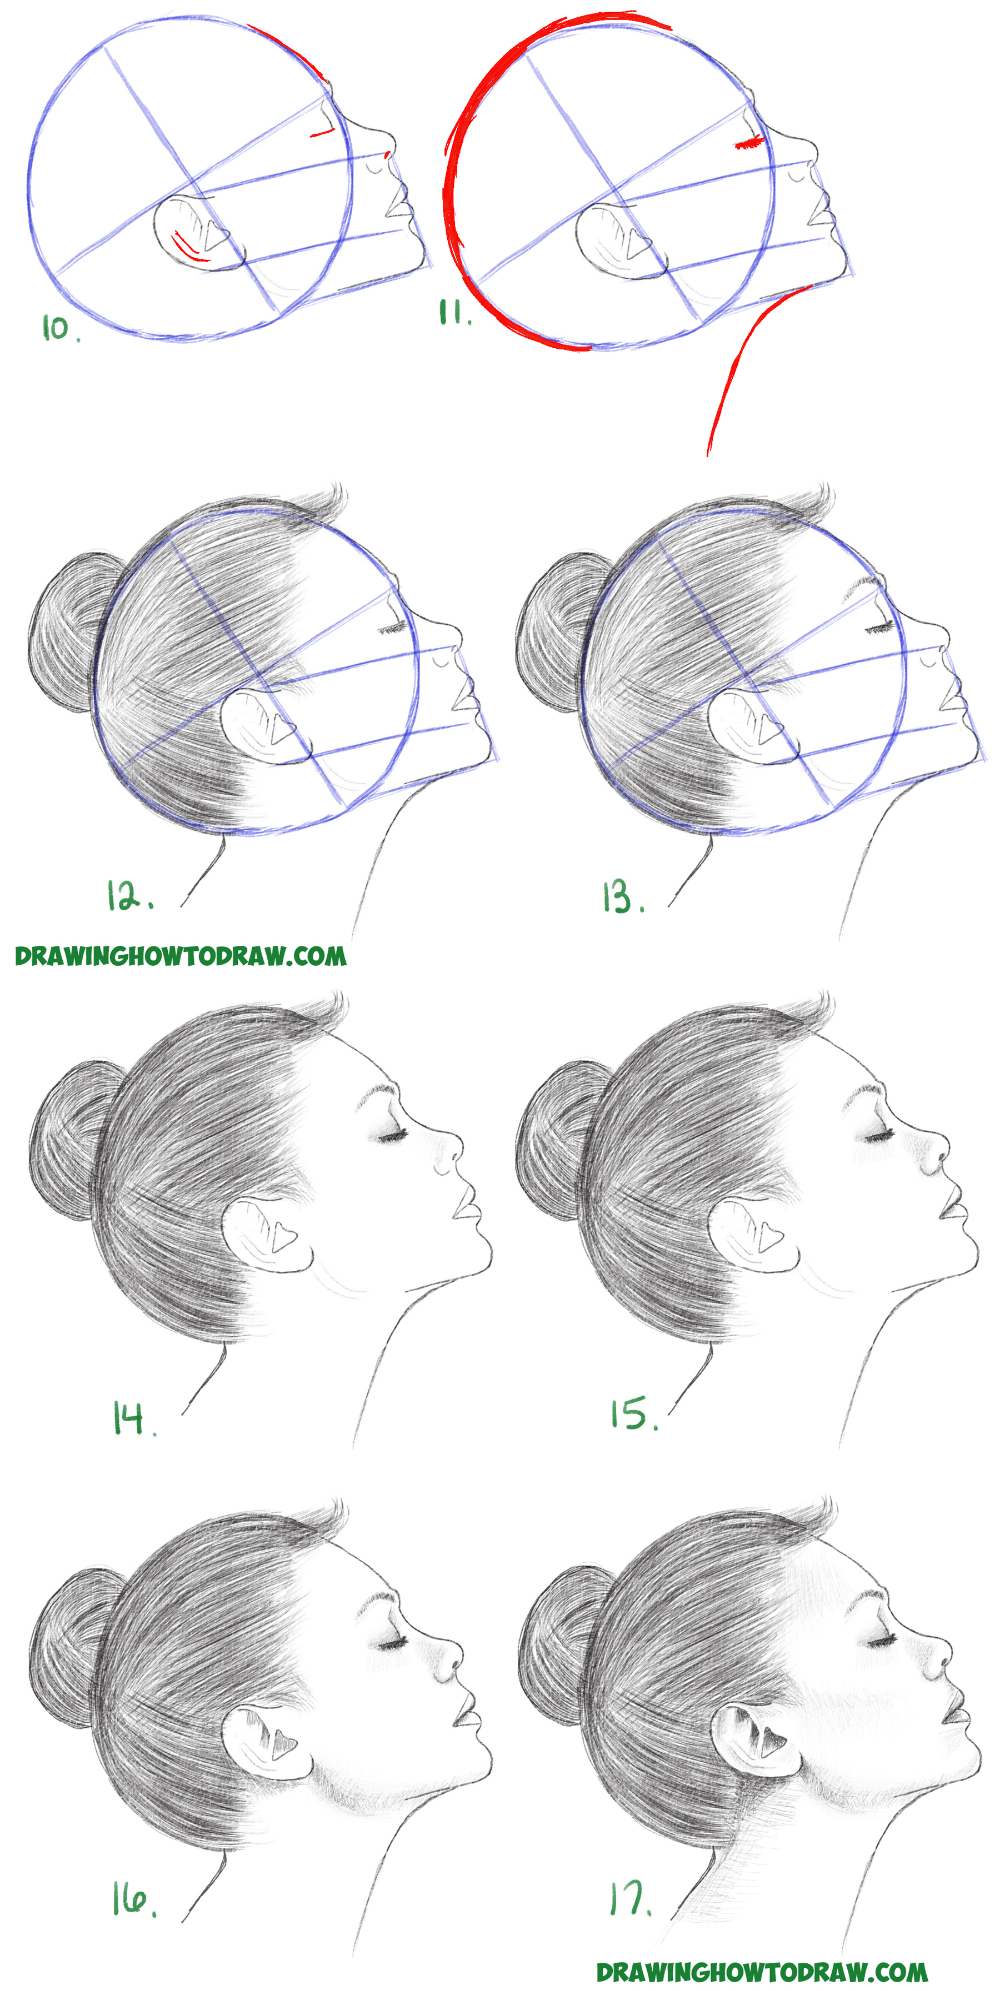 How to Draw a Face from the Side Profile View (Female / Girl / Woman) Easy Step by Step Drawing Tutorial for Beginners - How to Draw Step by Step Drawing Tutorials - How to Draw a Face from the Side Profile View (Female / Girl / Woman) Easy Step by Step Drawing Tutorial for Beginners - How to Draw Step by Step Drawing Tutorials -   17 beauty Face drawing ideas